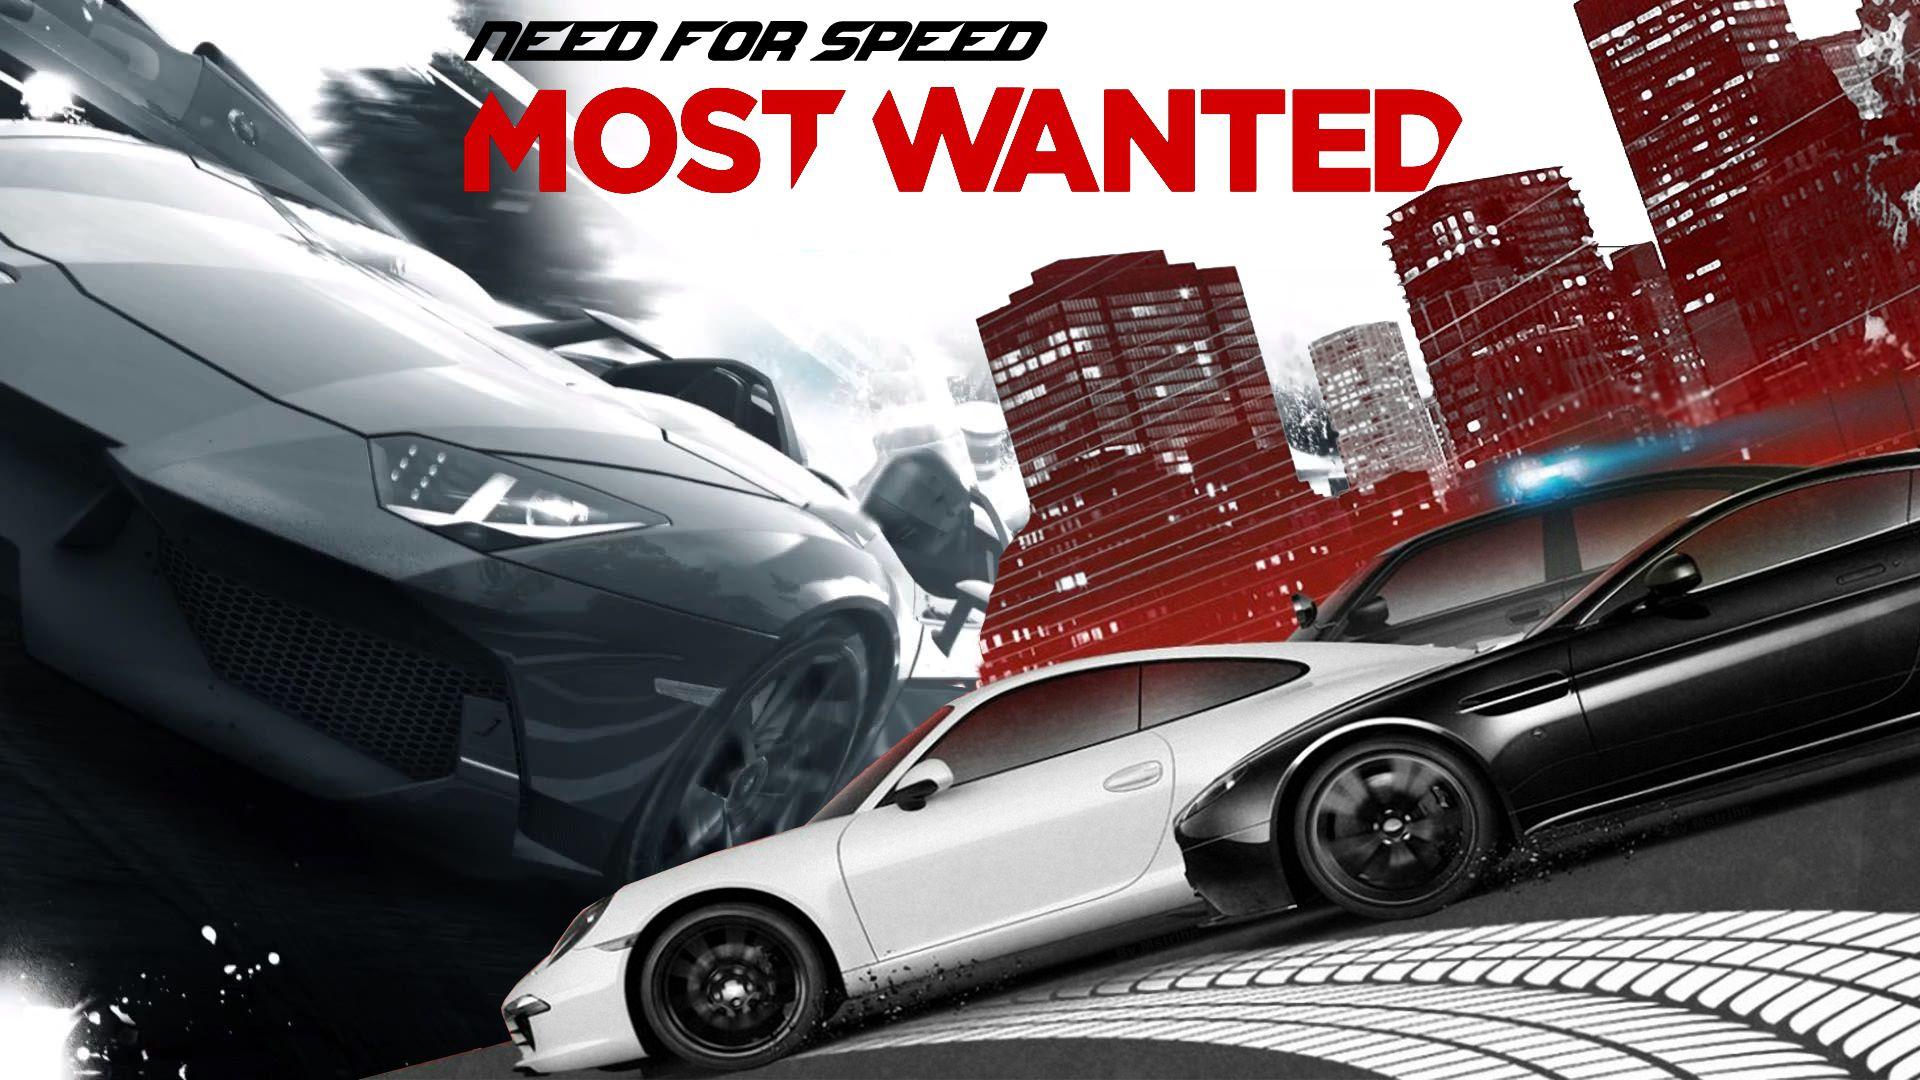 Need For Speed Most Wanted Xbox Wallpaper HD Cars Mobile High